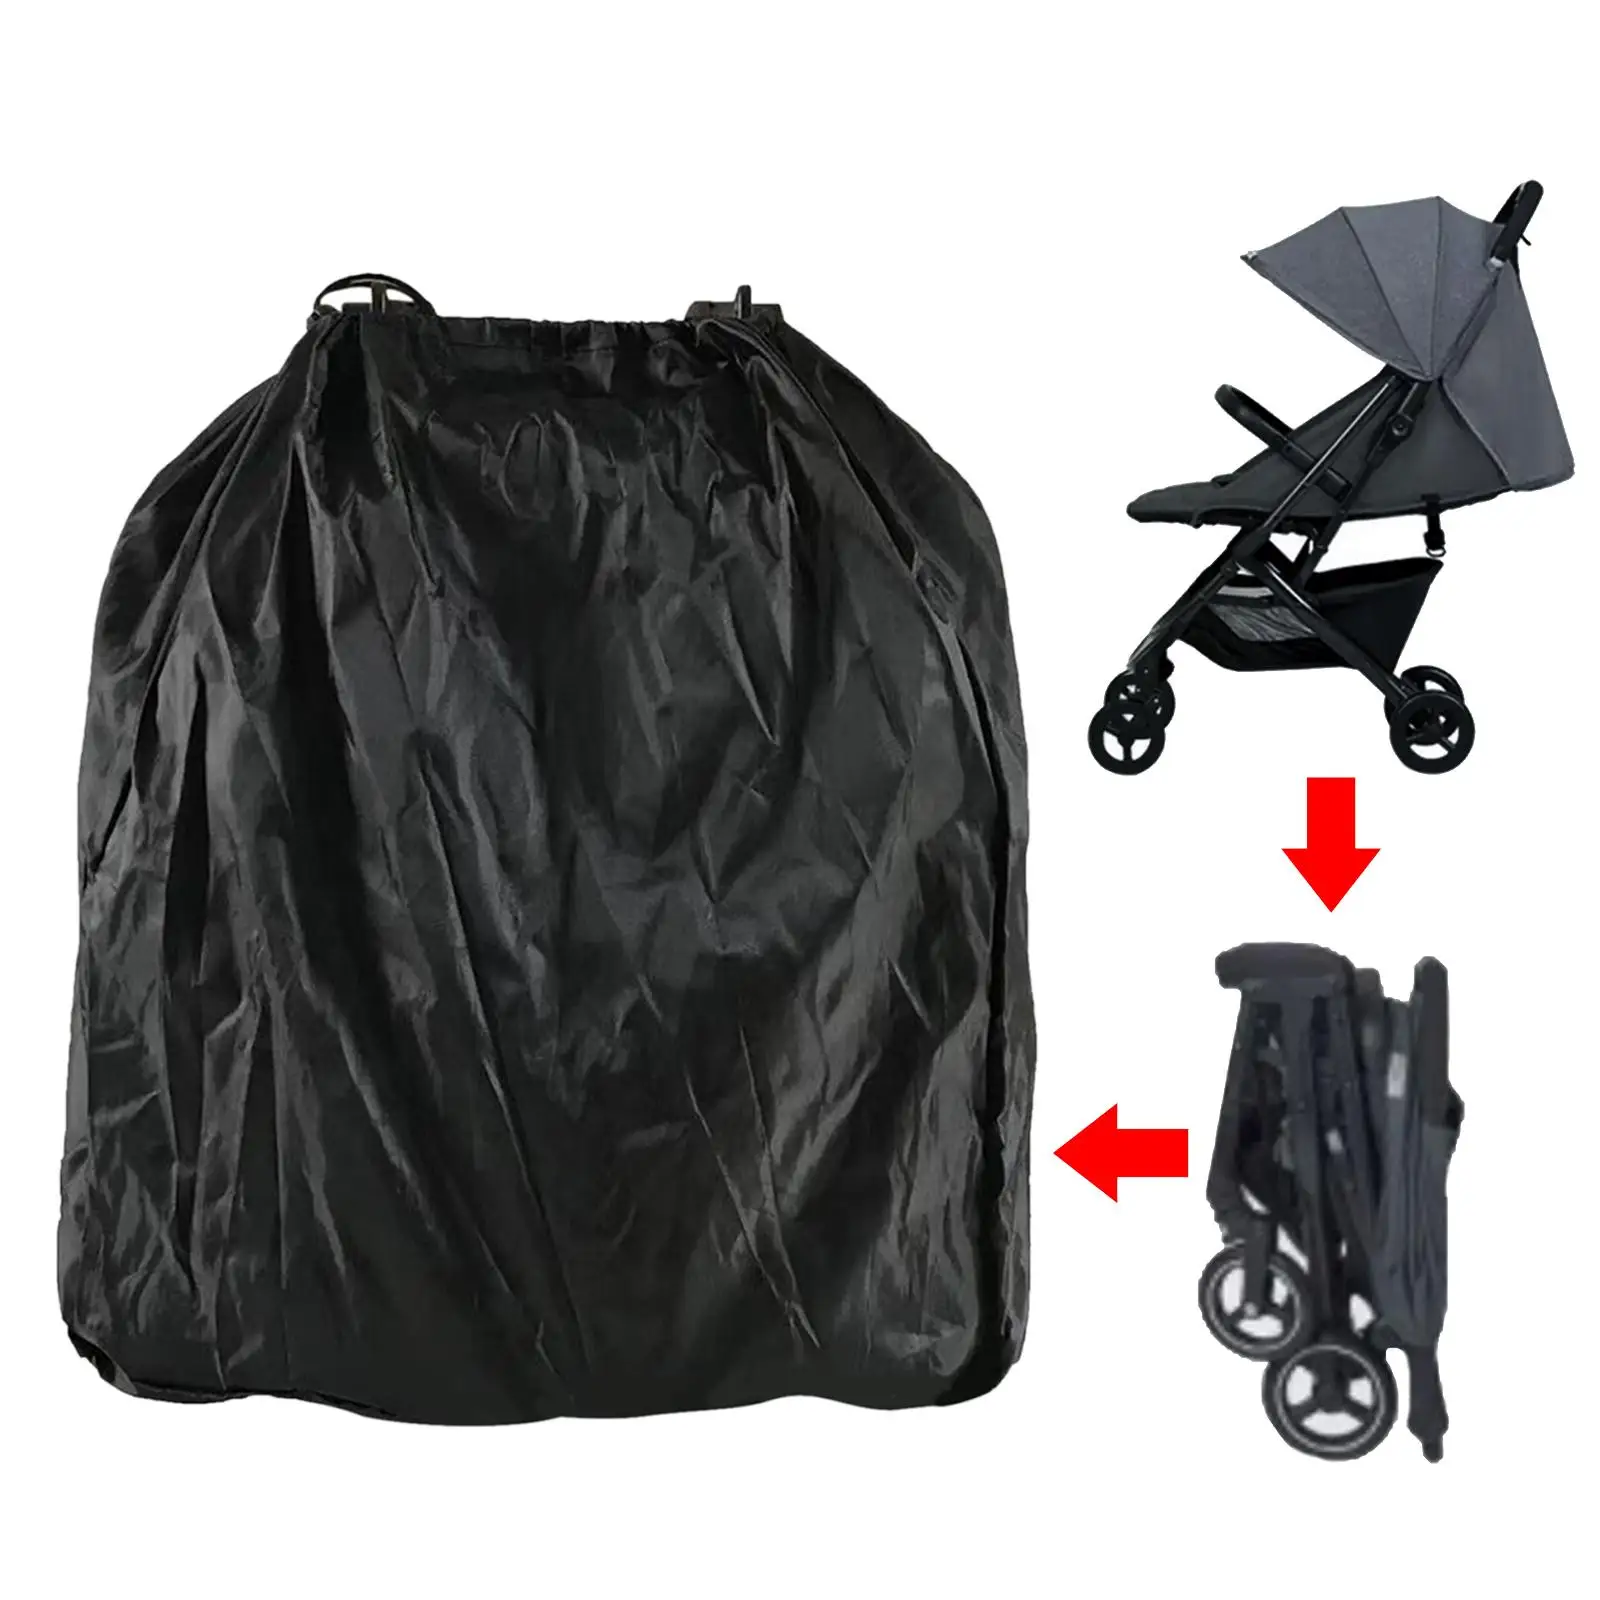 Travel Stroller Bag Carrying Oxford Cloth Drawstring Closure Umbrella Stroller Travel Bag for Airplane Gate Check Airports